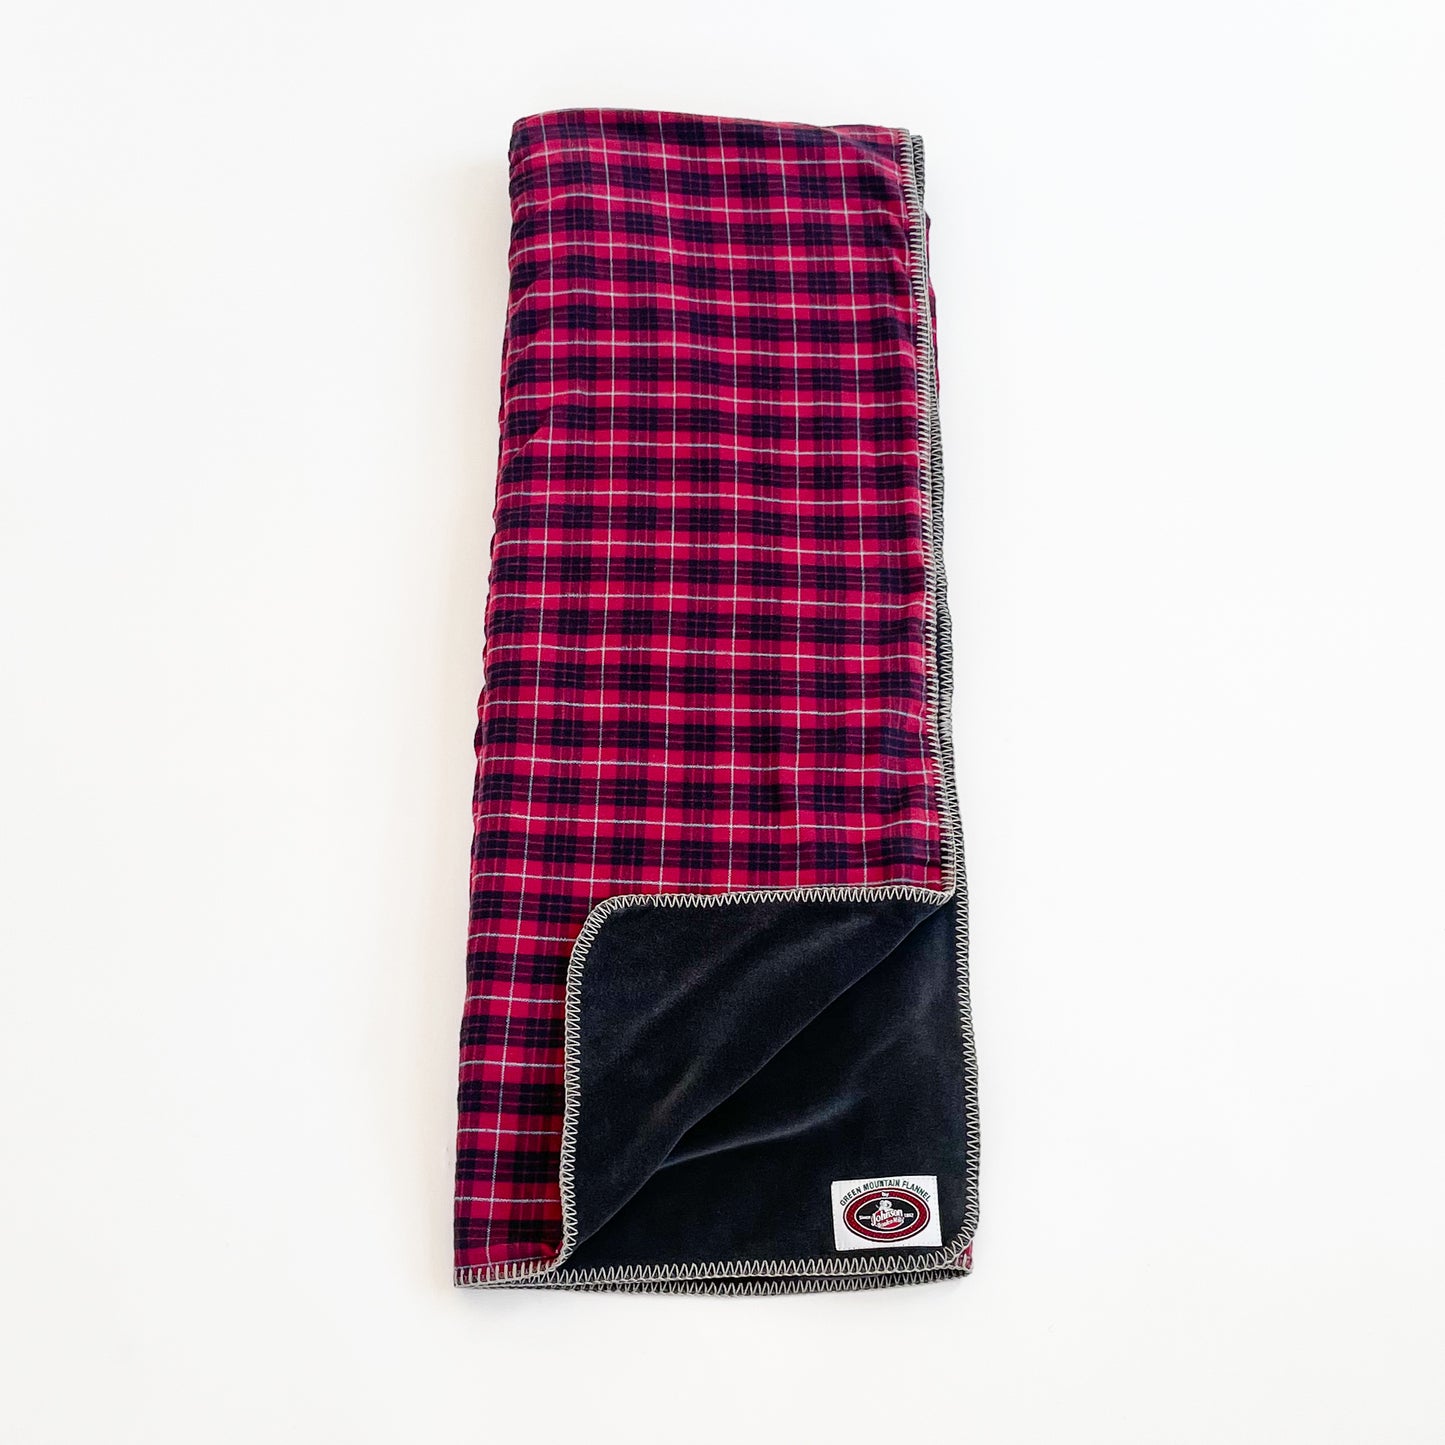 Red, black with white pinstripe plaid Flannel throw blanket laid out with black fleece lining